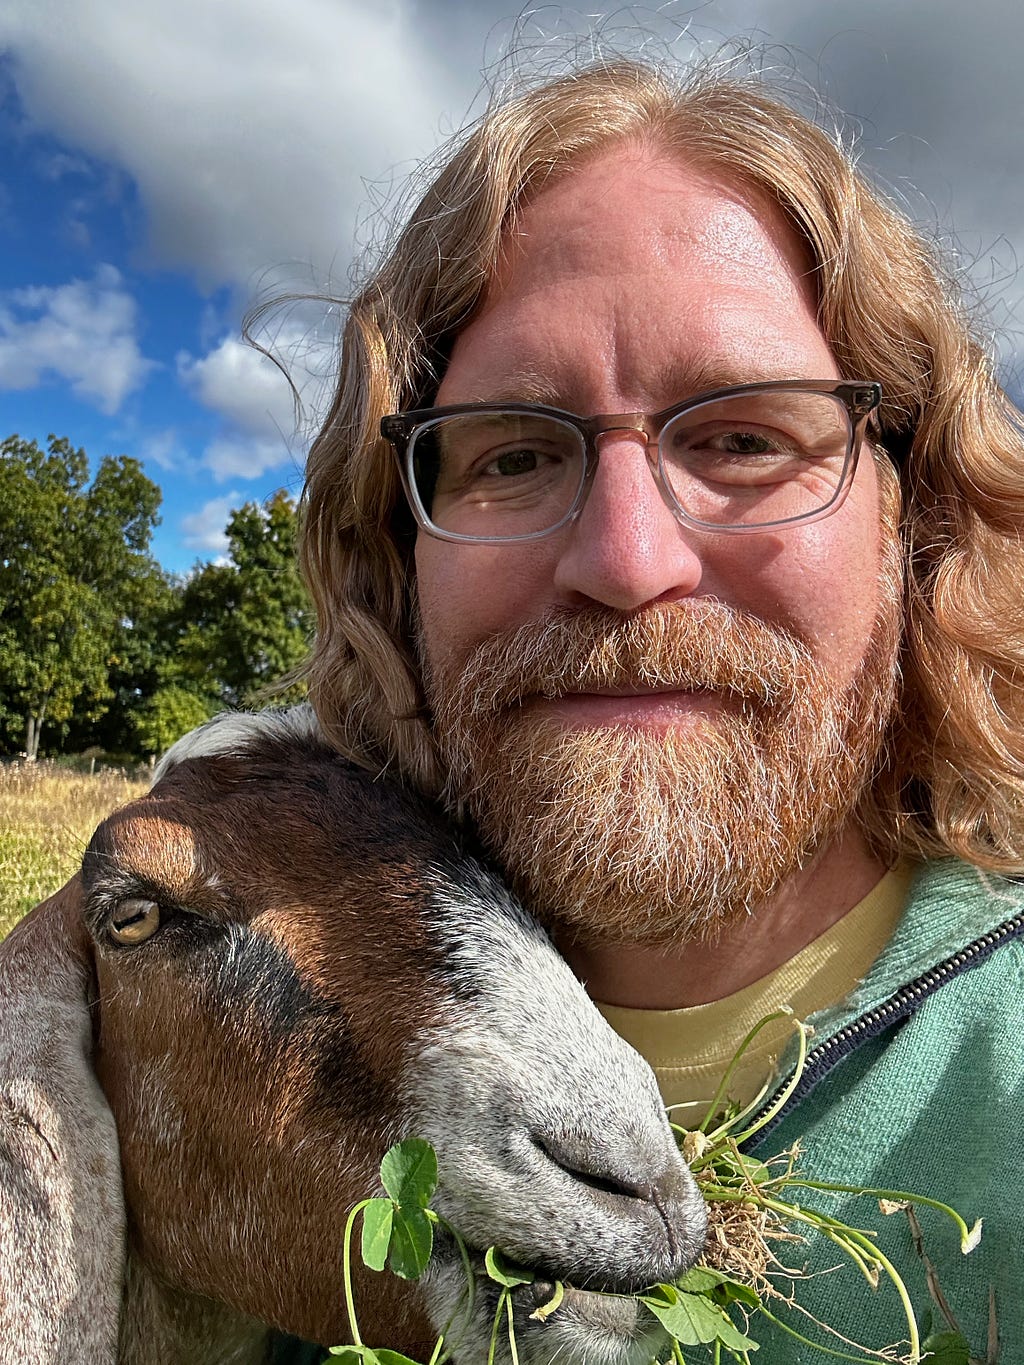 Selfie of a man with shoulder-length red hair and a beard, with a smattering of white hairs throughout. He is wearing brown glasses and looking at the camera. Below the man is a Nubian goat, with reddish fur and a white muzzle. The goat has a mouth full of clover. Behind them are a blue sky, trees, and a field.